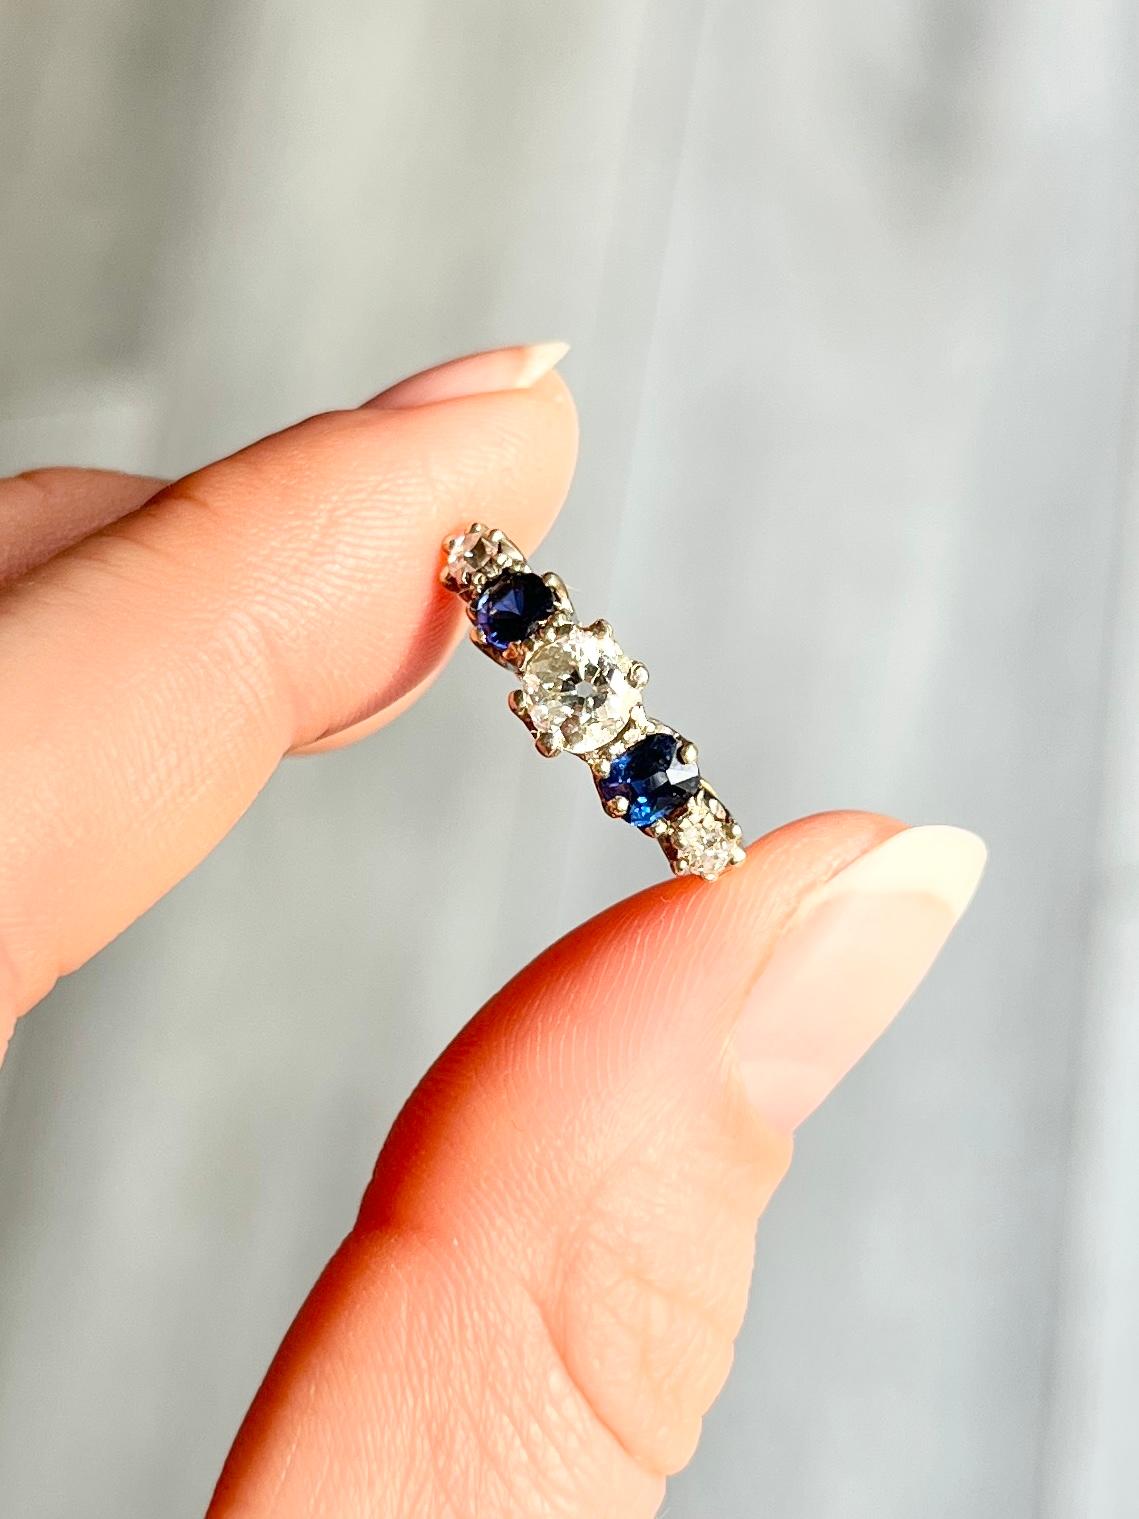 This gorgeous ring holds two deep blue sapphires measuring 25pts each and three diamonds. The central diamond measures 50pts and the smaller diamonds measure 7pts each. The ring is modelled in 18ct gold and stones set in platinum claws. 

Ring Size: